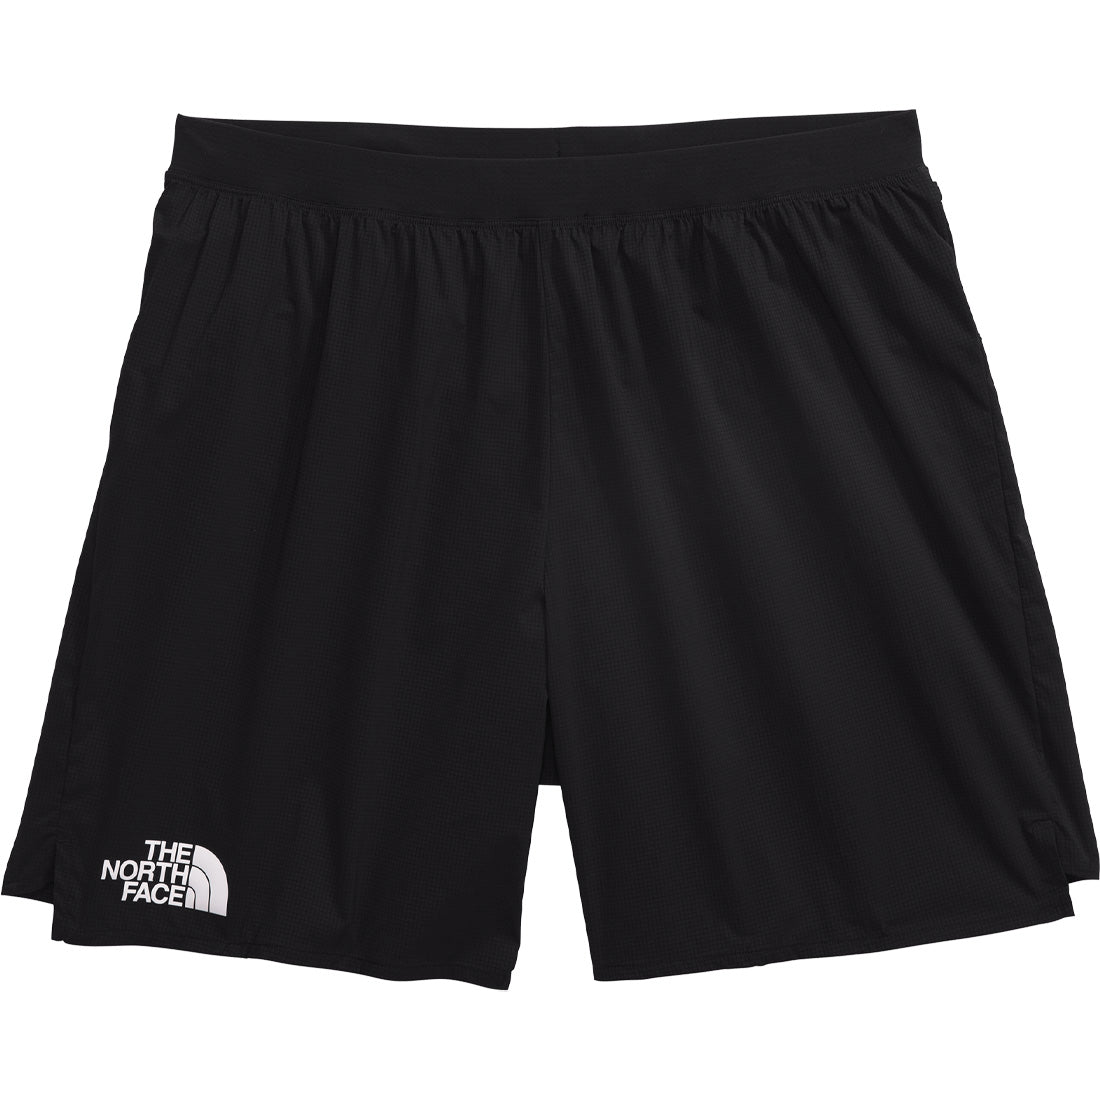 The North Face Summit Series Pacesetter Short 7" - Men's